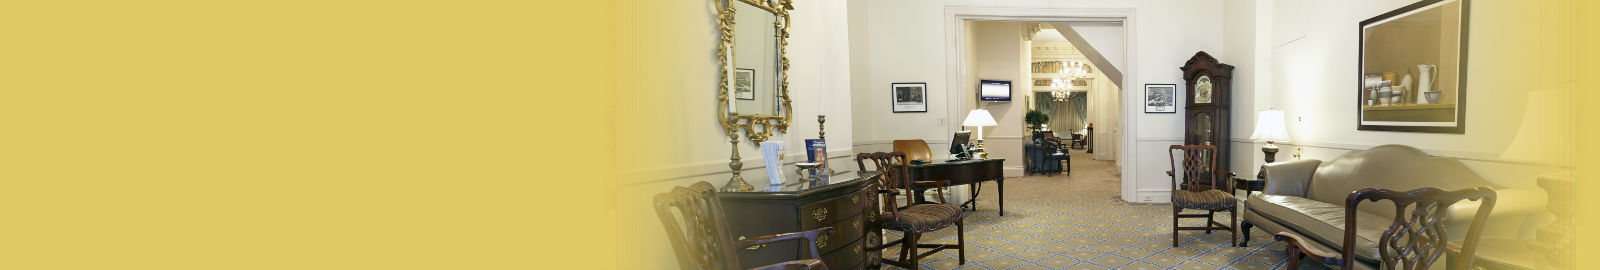 Manhattan Based Funeral Home - Photo of Interior